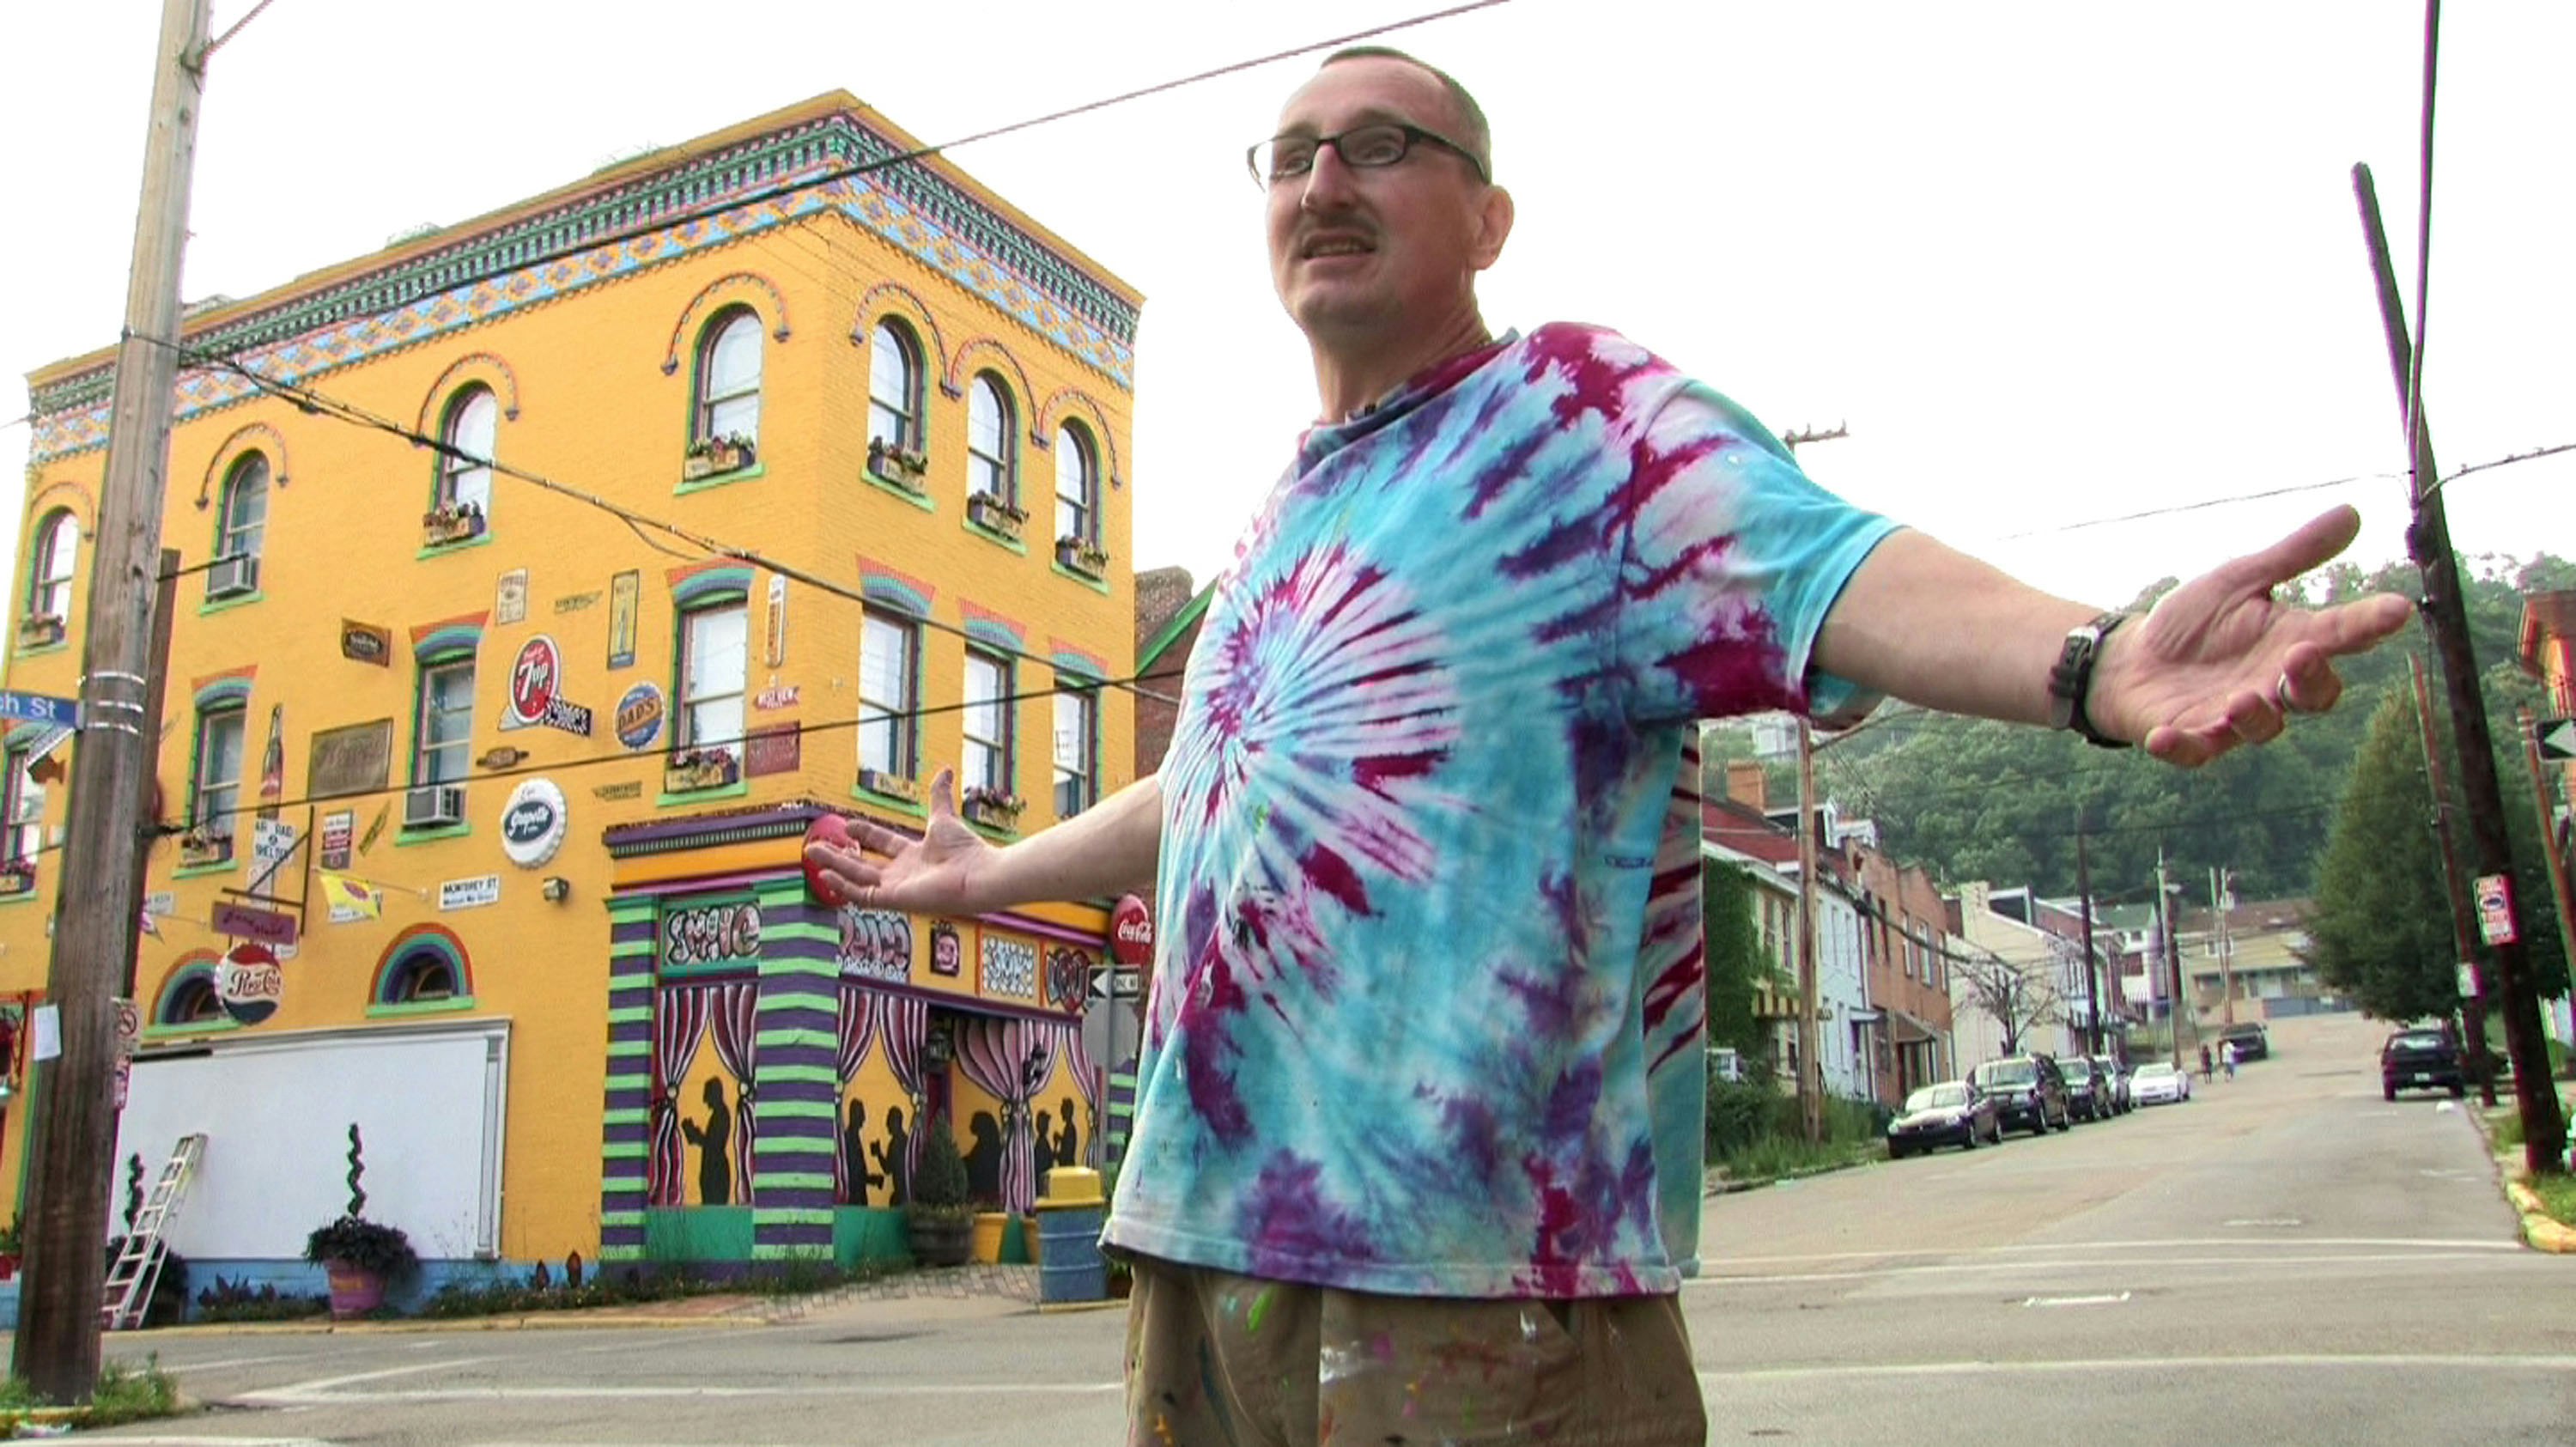 Street artist Randy Gilson stands in front of the yellow brick Italianate facade of Randyland, with his arms spread in a blue, red, and purple tie-dyed t-shirt